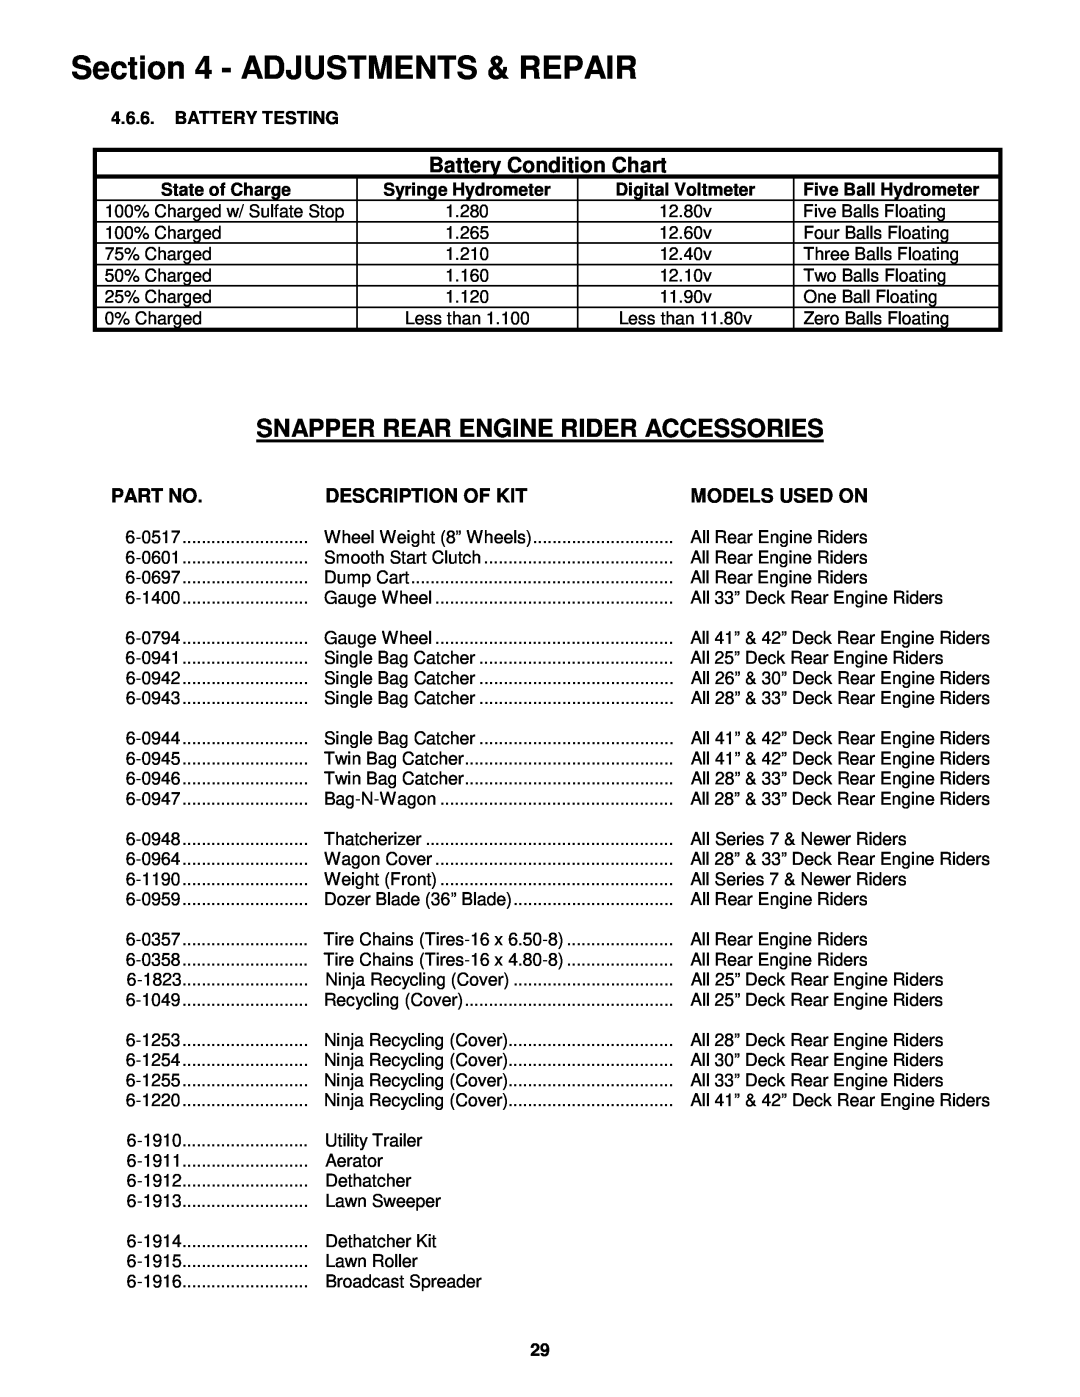 Snapper 421823BVE Snapper Rear Engine Rider Accessories, Adjustments & Repair, Battery Condition Chart, Description Of Kit 